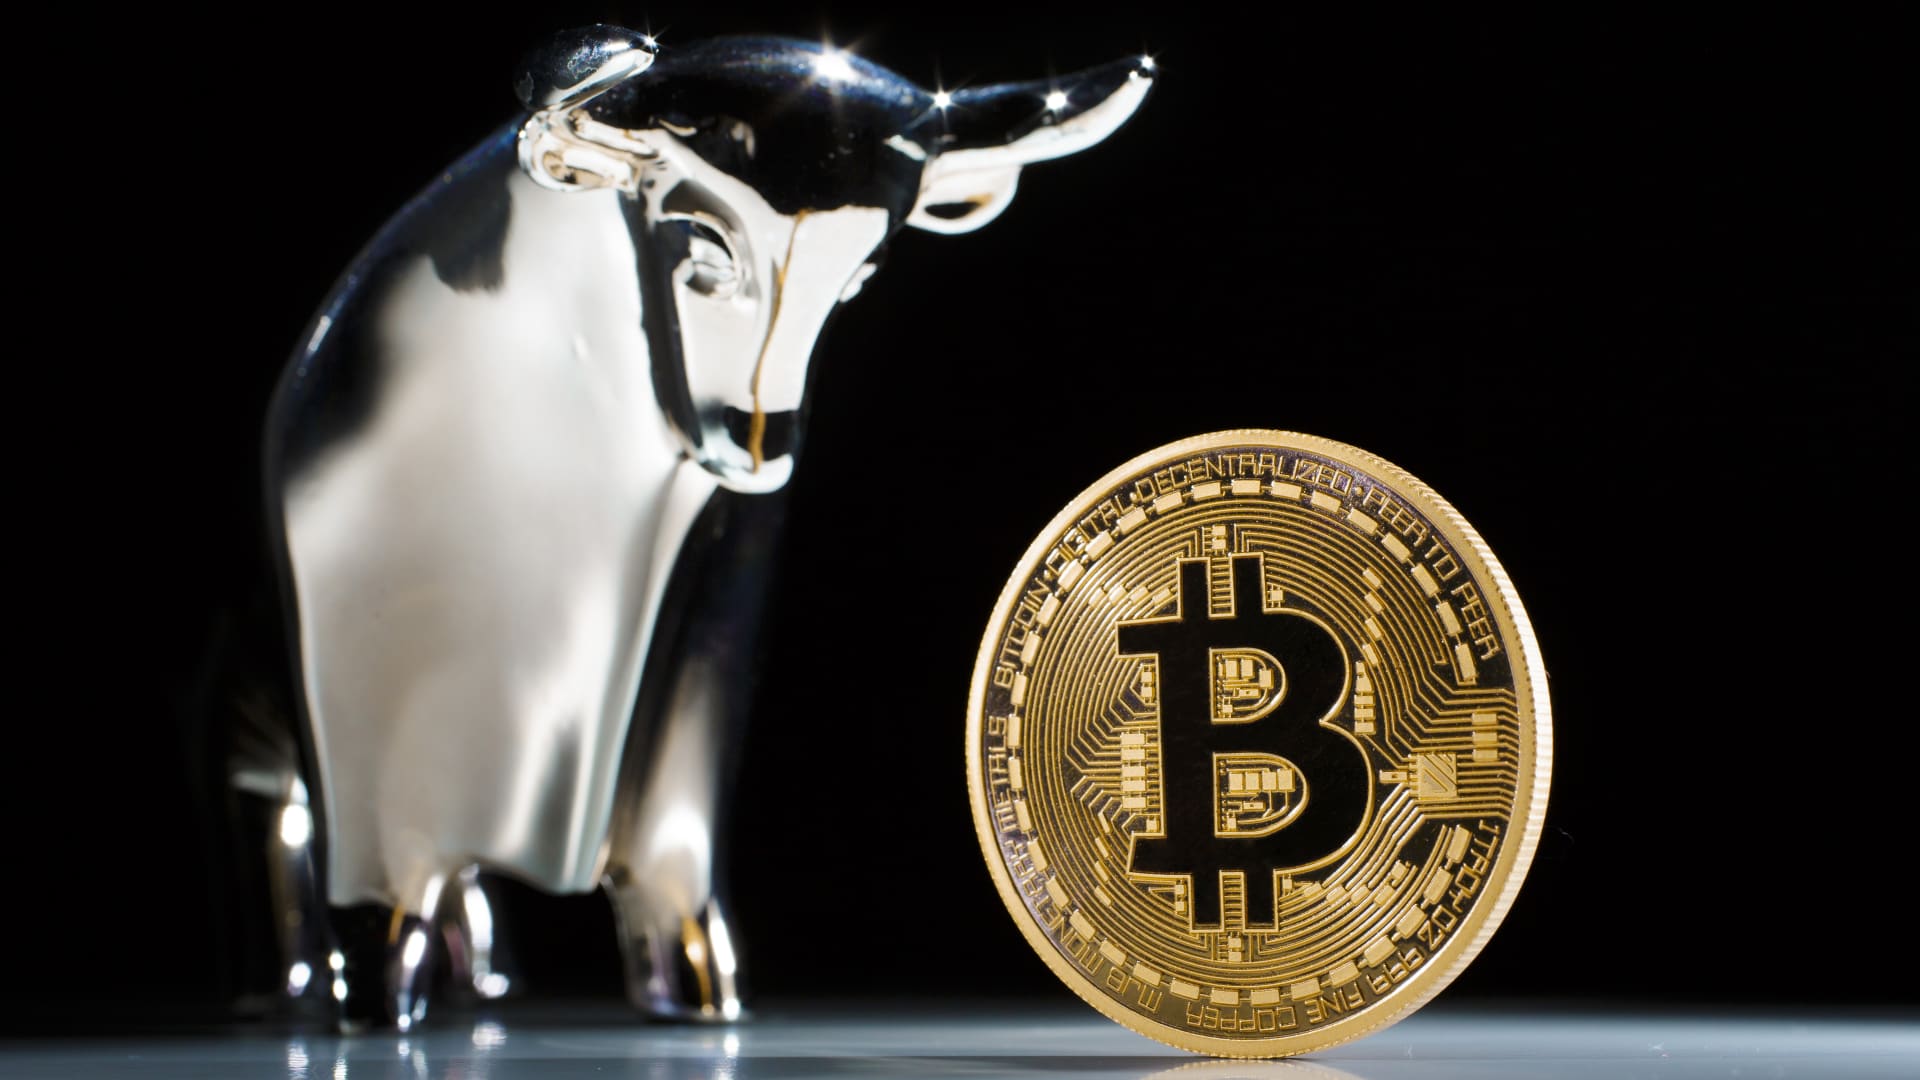 Bitcoin has recovered nearly all of its 2022 losses after cryptocurrencies resumed their rally on Friday, climbing above $26,000 for the second time t